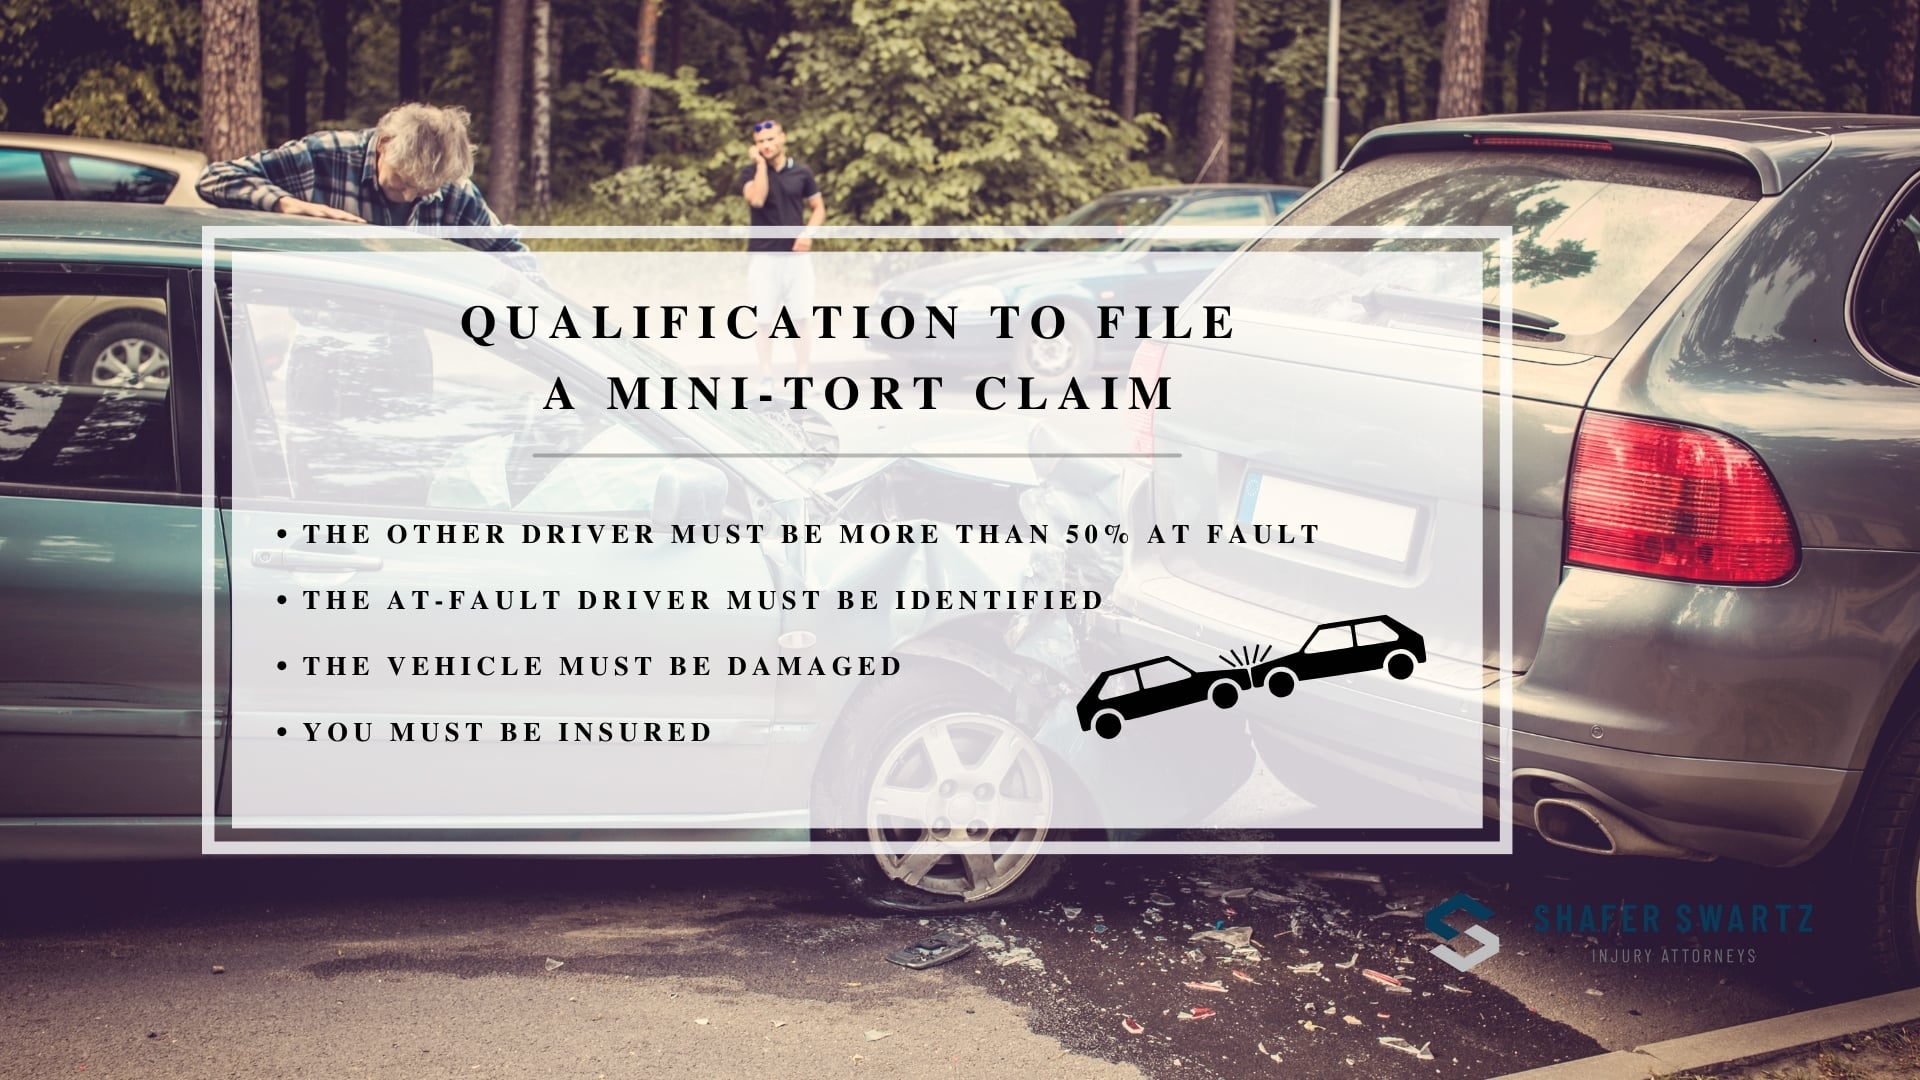 Infographic image of qualification to file a mini-tort claim